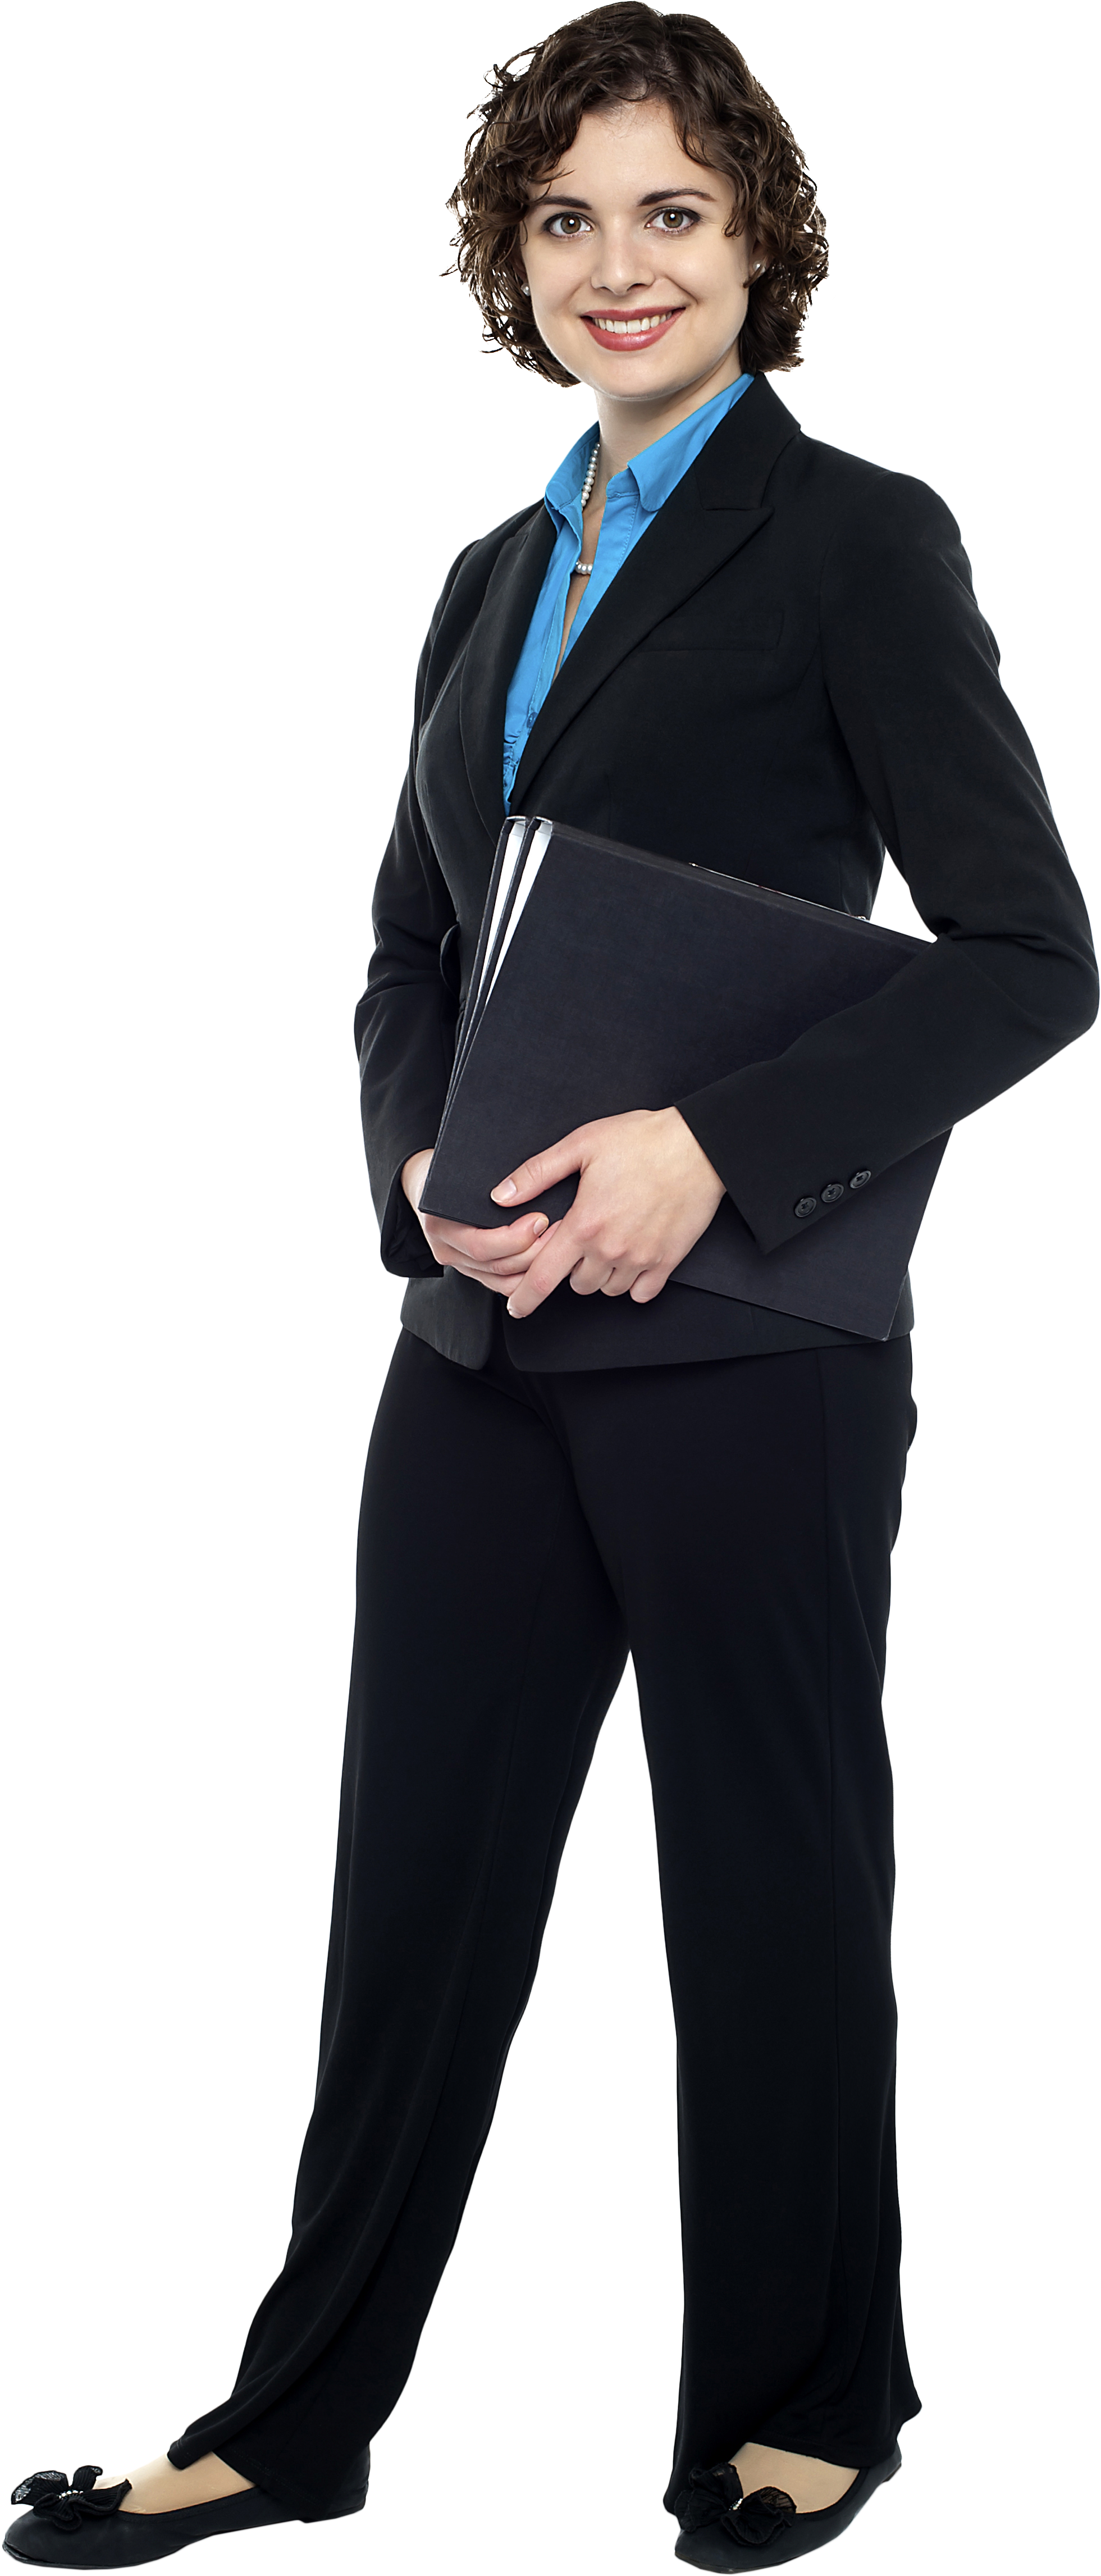 Professional Woman Business Photos Free Transparent Image HD PNG Image